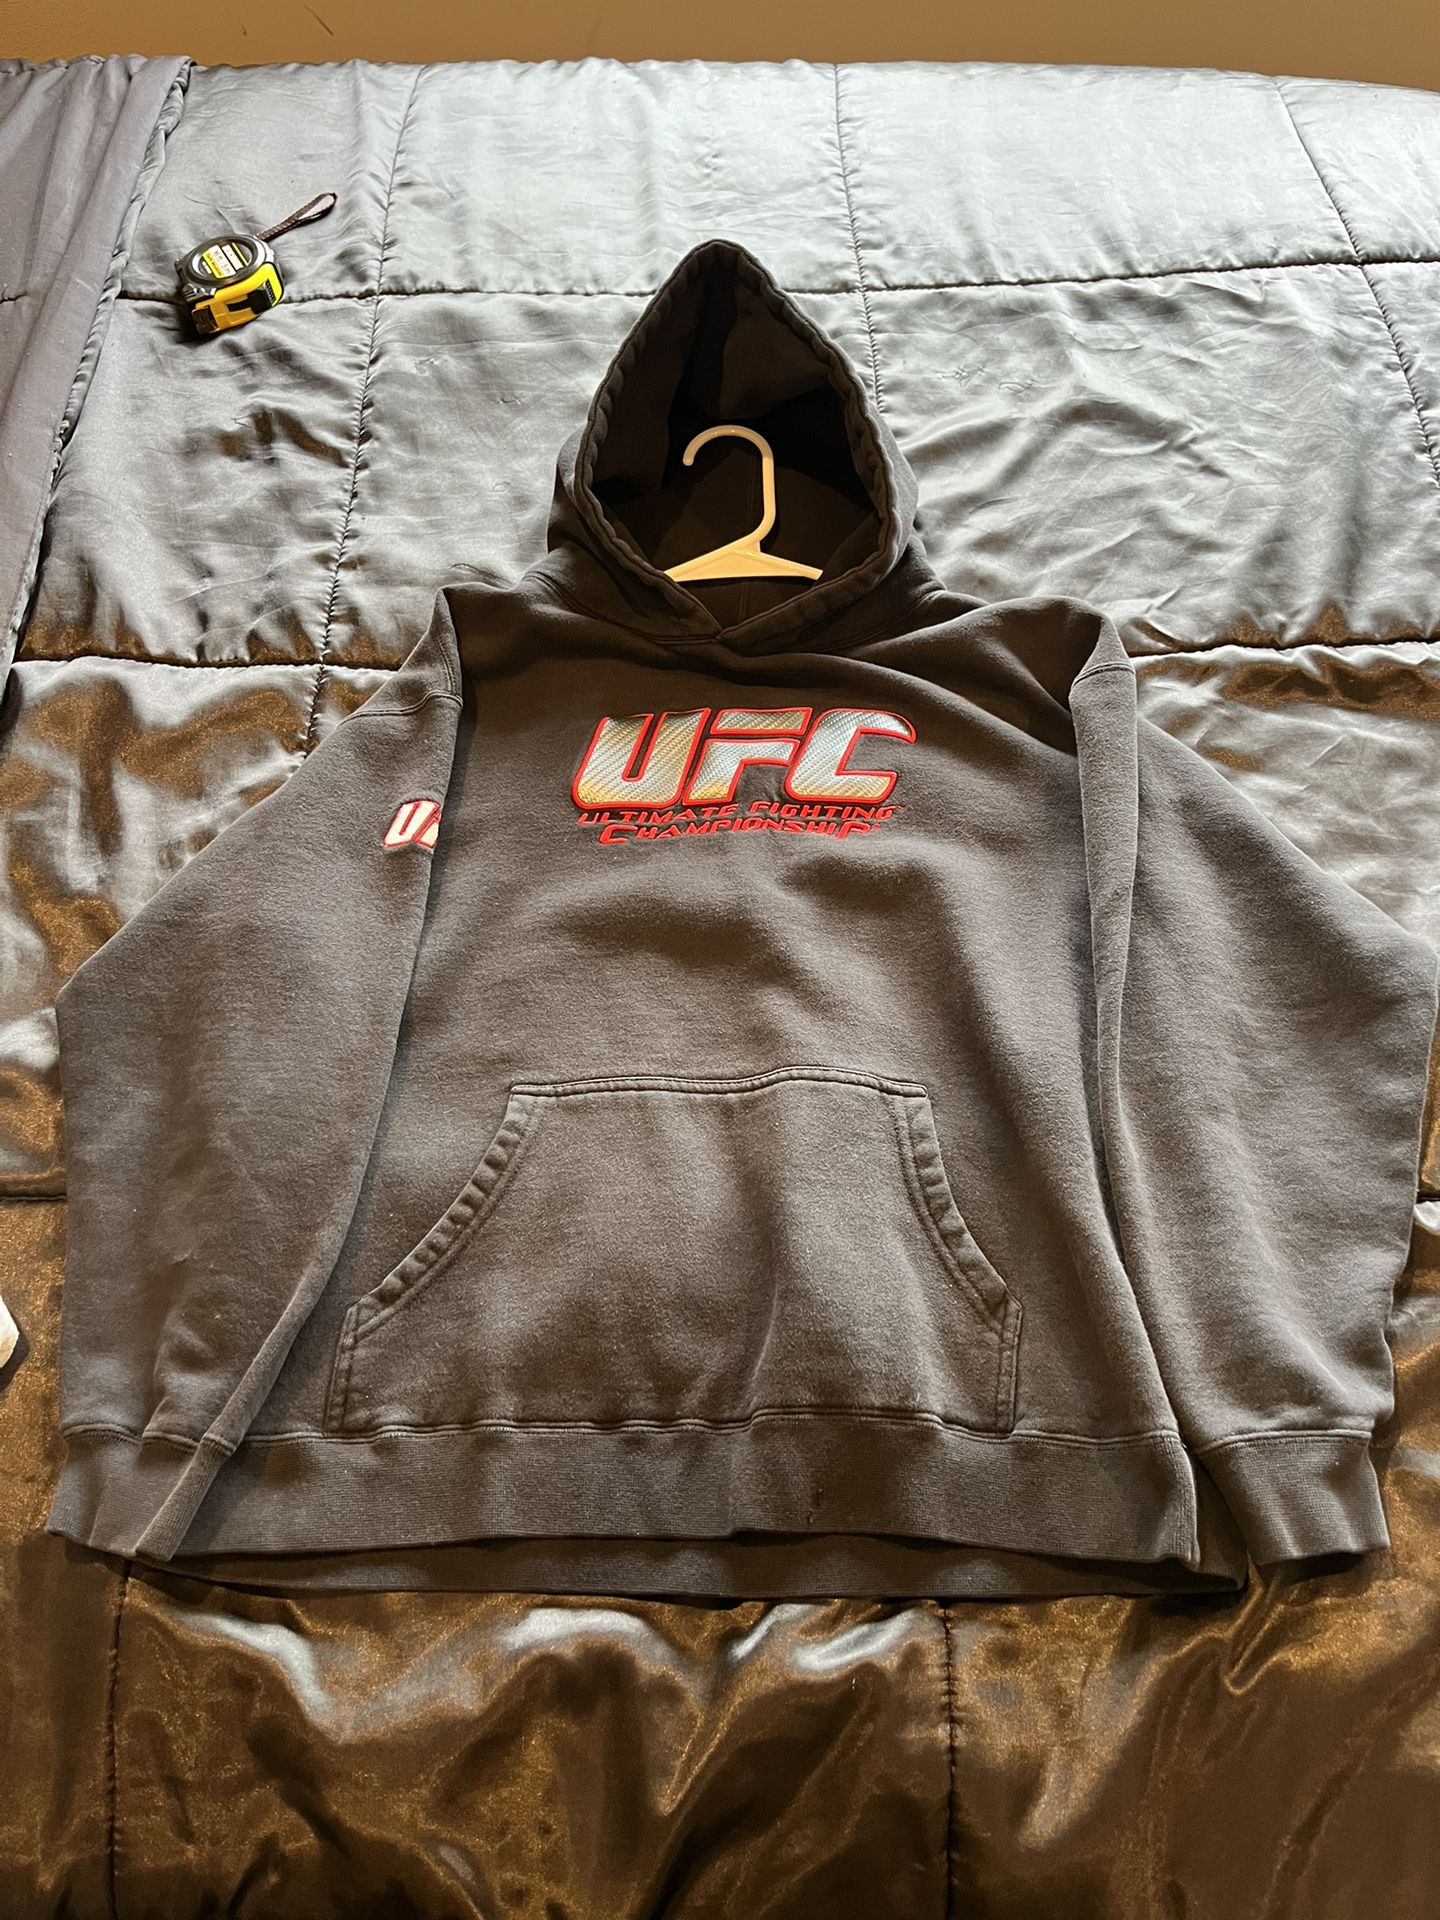 UFC Officially Licensed Mens hoodie 